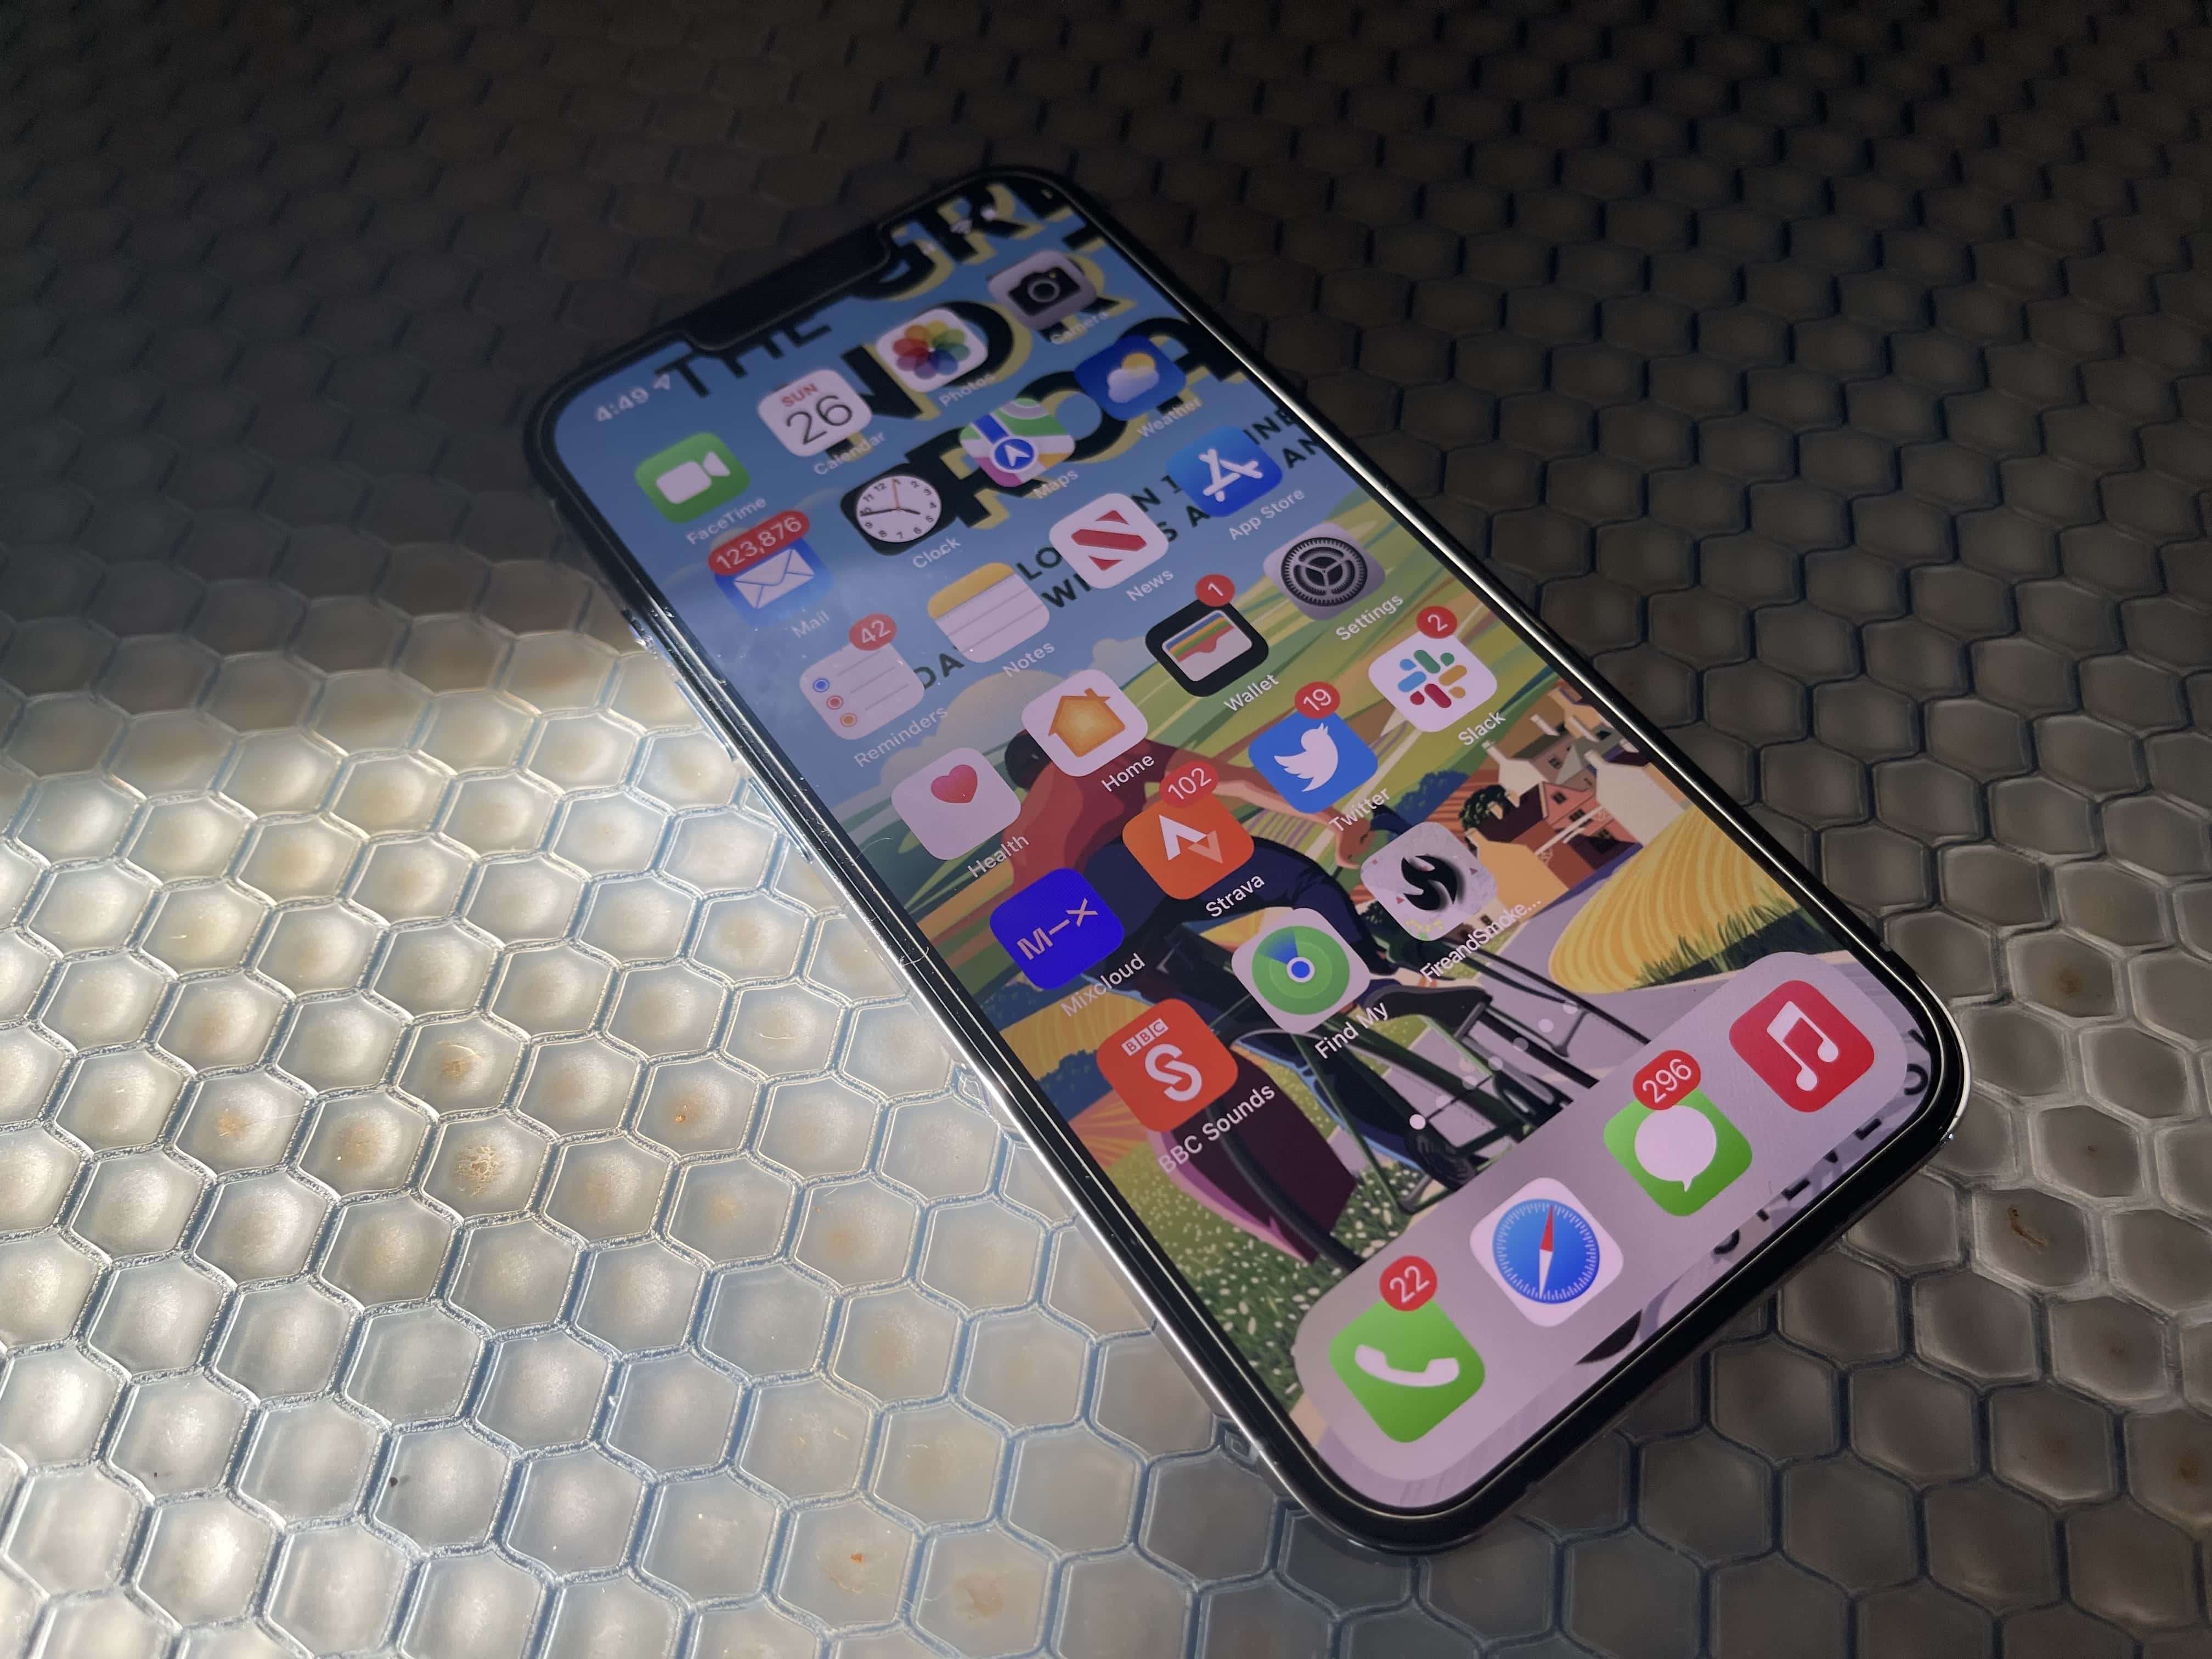 The iPhone 13 Pro's display is simply spectacular. It's gorgeous. It's great. I can't bear to look at lesser screens now